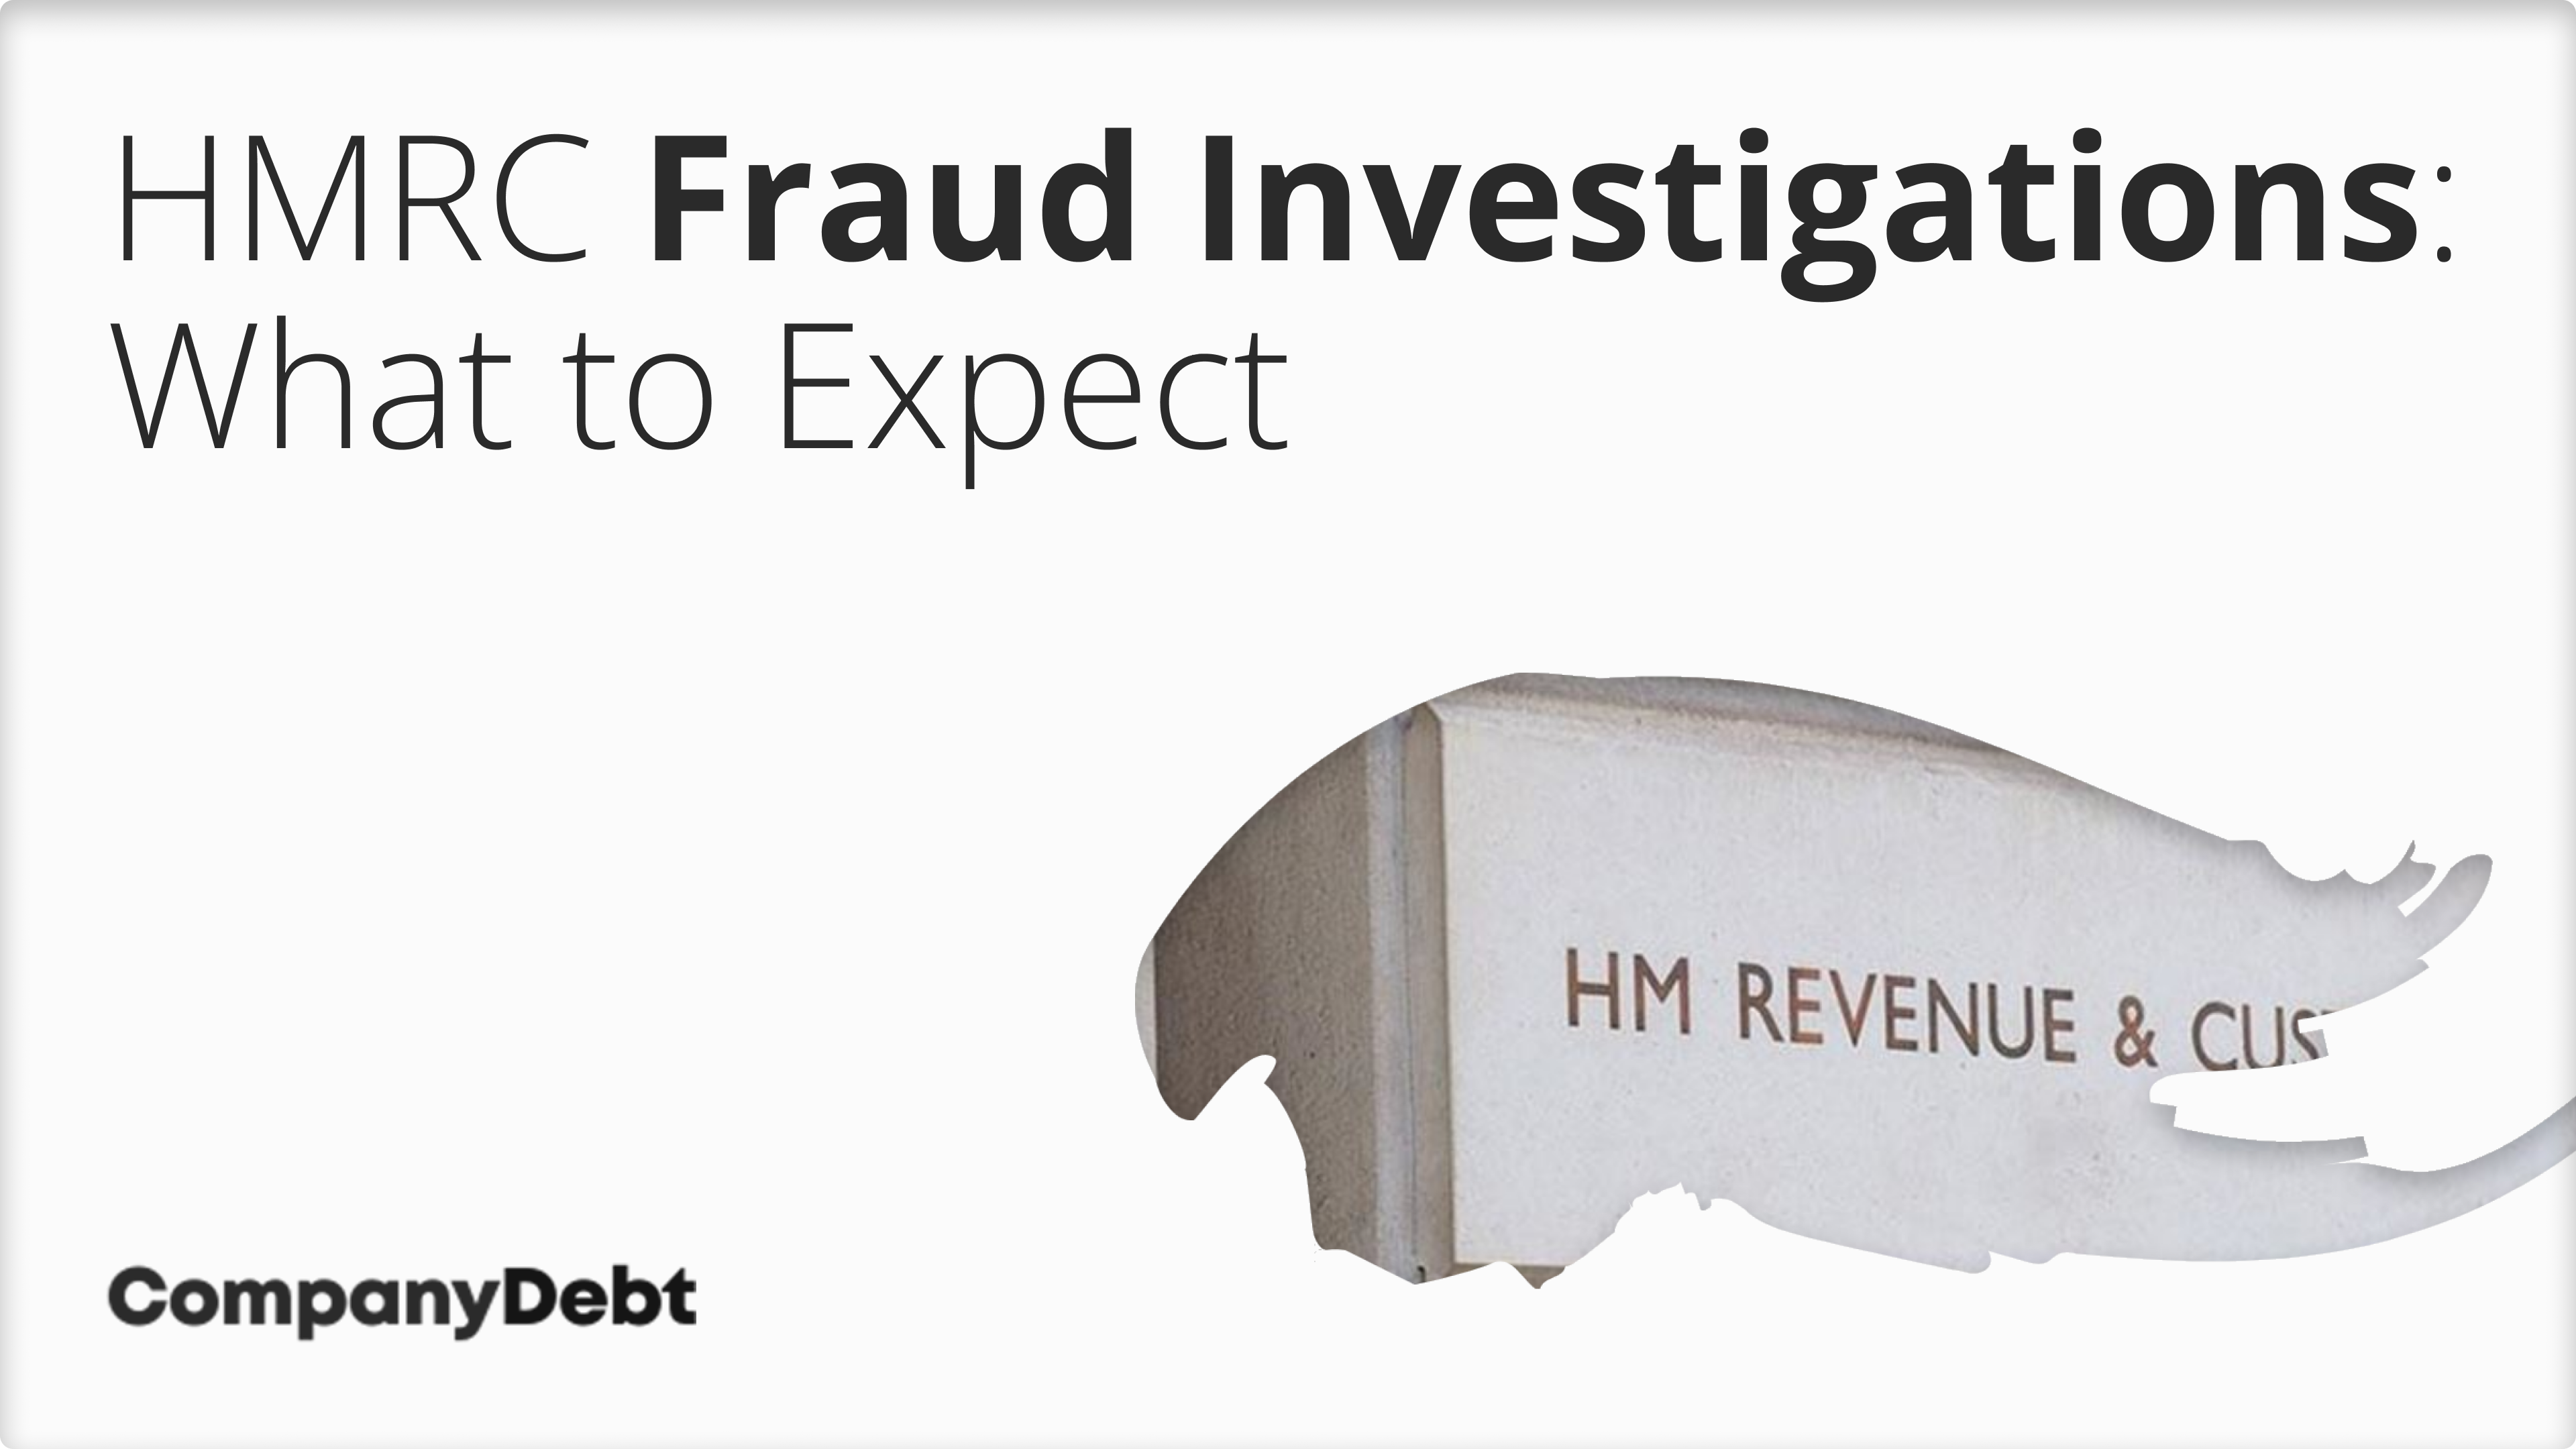 HMRC-Fraud-Investigations_-What-to-Expect